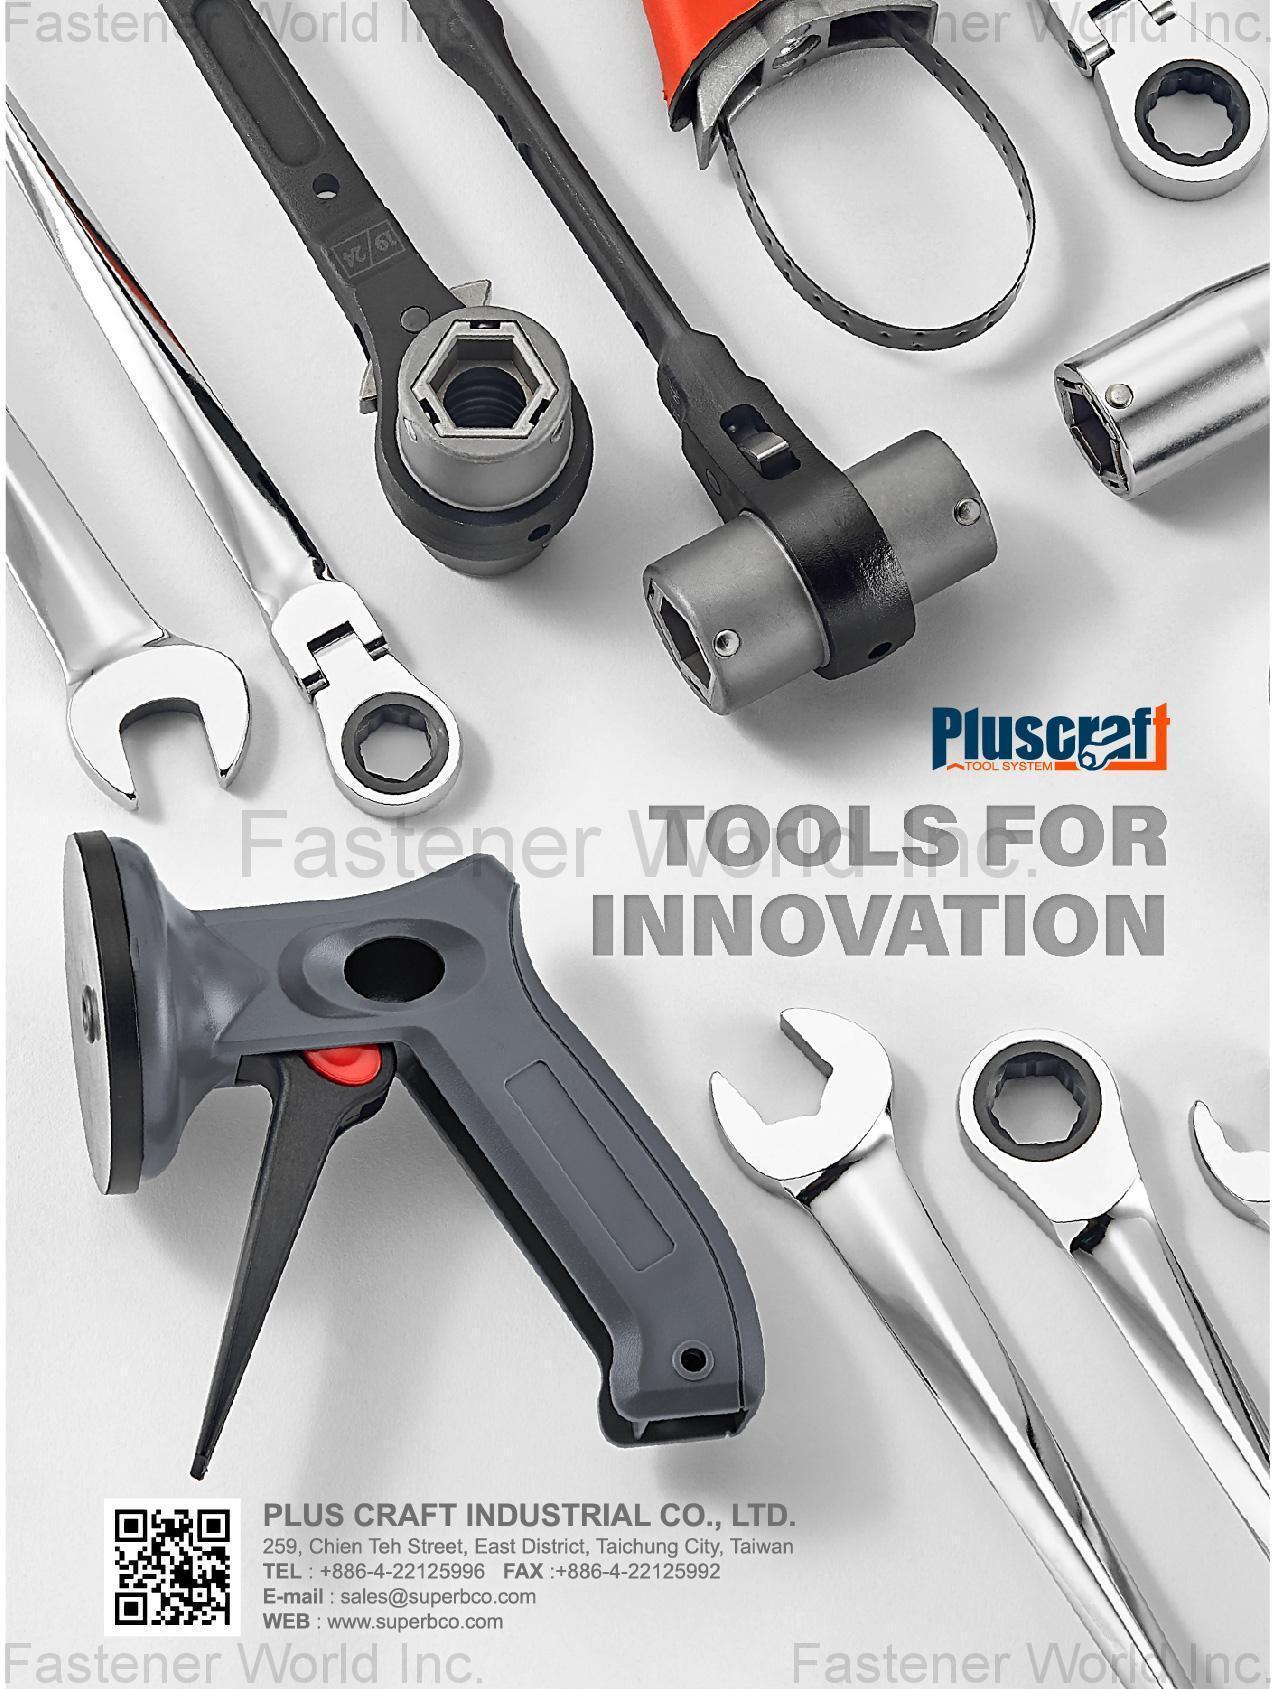 PLUS CRAFT INDUSTRIAL CO., LTD. , Ratchet Wrench,Combination Wrench,ox End Wrench,Open End Wrench,Socket Wrench,Flare Nut Wrench,Torque Wrench,Impact Wrench,Special Wrench,Hand Socket,Impact Socket,Bit Socket,Socket Set,Socket Holder,Tool Kit,Trolley,Cabinet,Puller,Tiling/Fooring Tools,Drywall/Plastering,Masonry/Cement/Concrete,Wallcovering/Painting Tools,Glass Tools/Culking Gun , Hex-key Wrenches